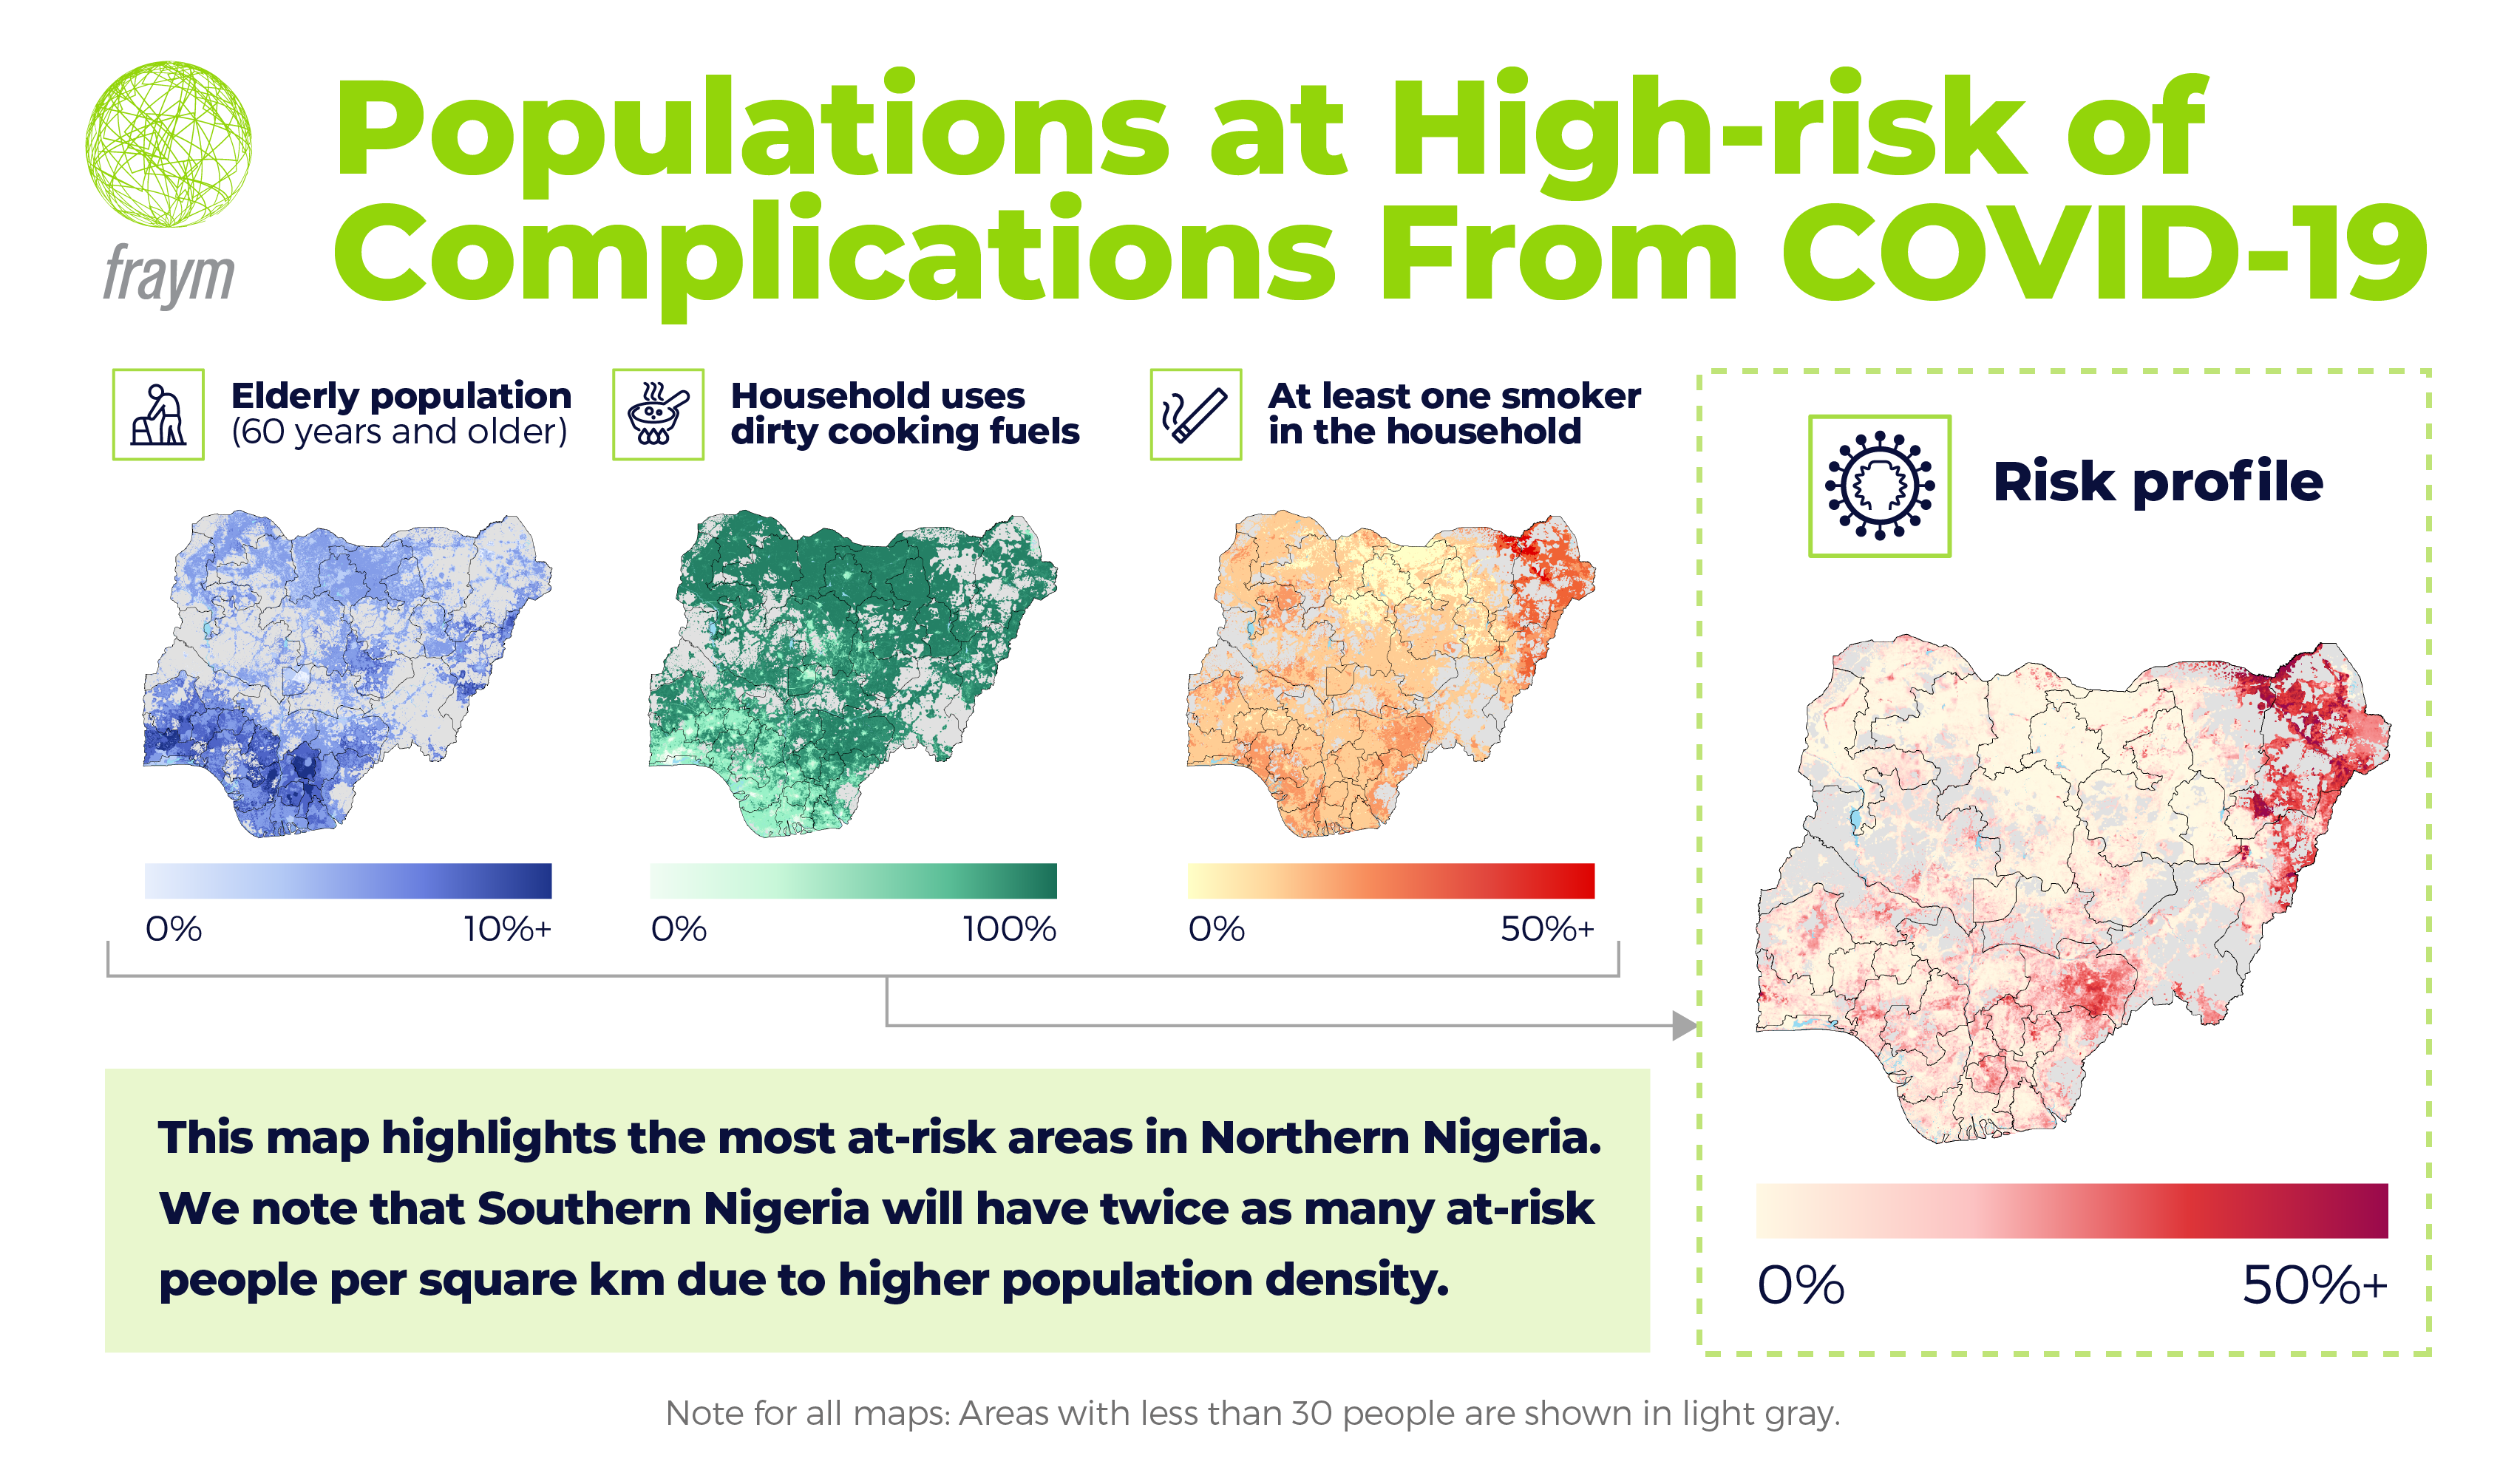 Maps of populations at high-risk of complications from Covid-19